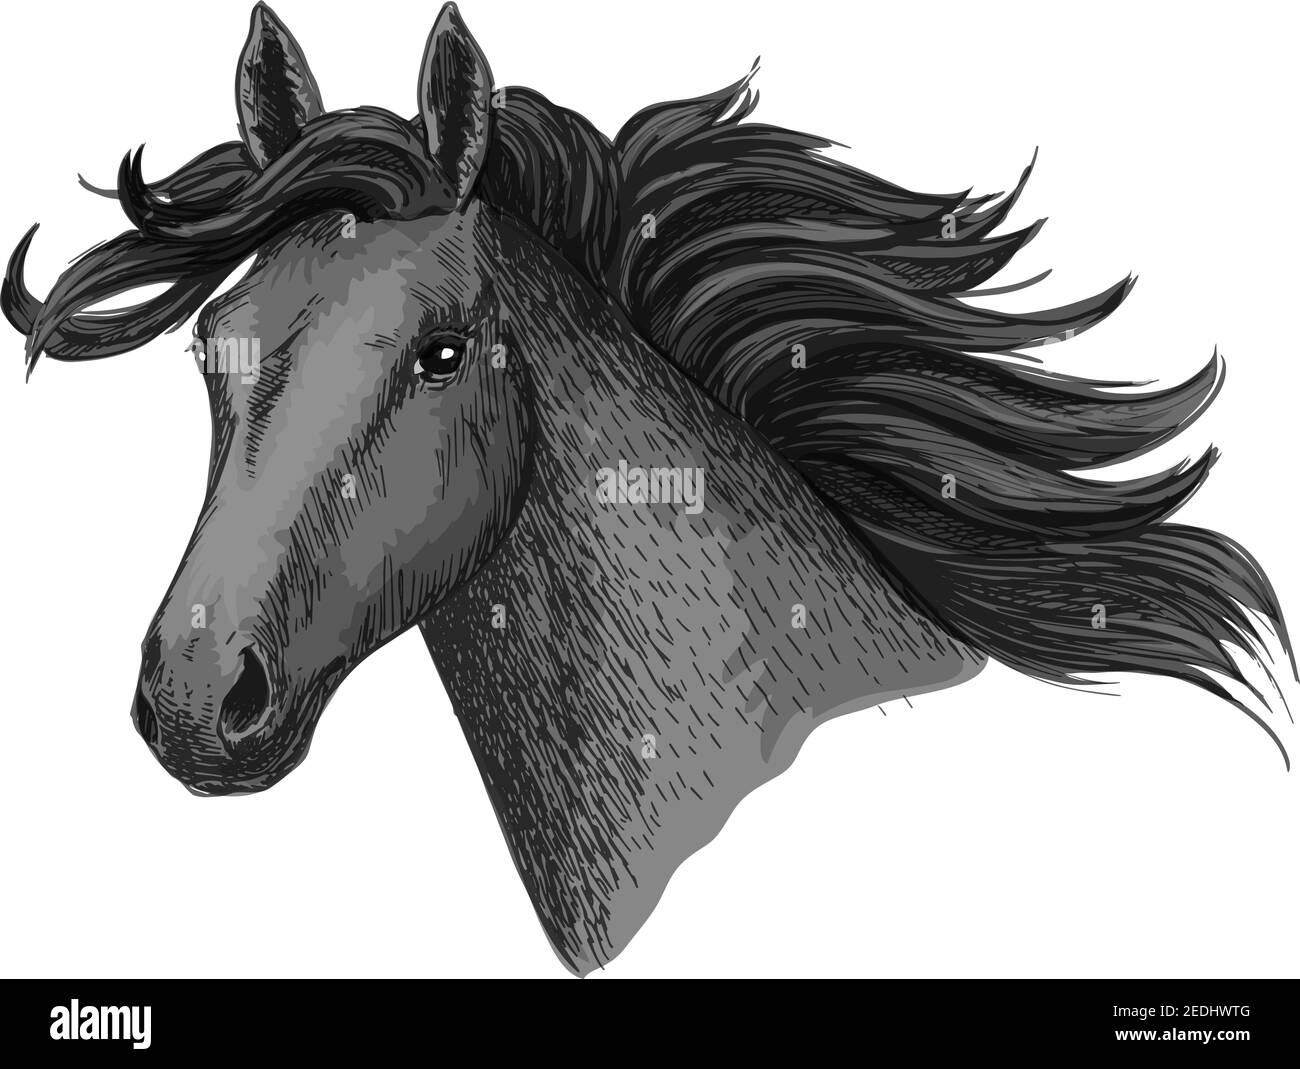 Horse head. Vector symbol of mustang or mare with waving mane for horse races or racing. Stallion sketch for equine animal riding contest or exhibitio Stock Vector